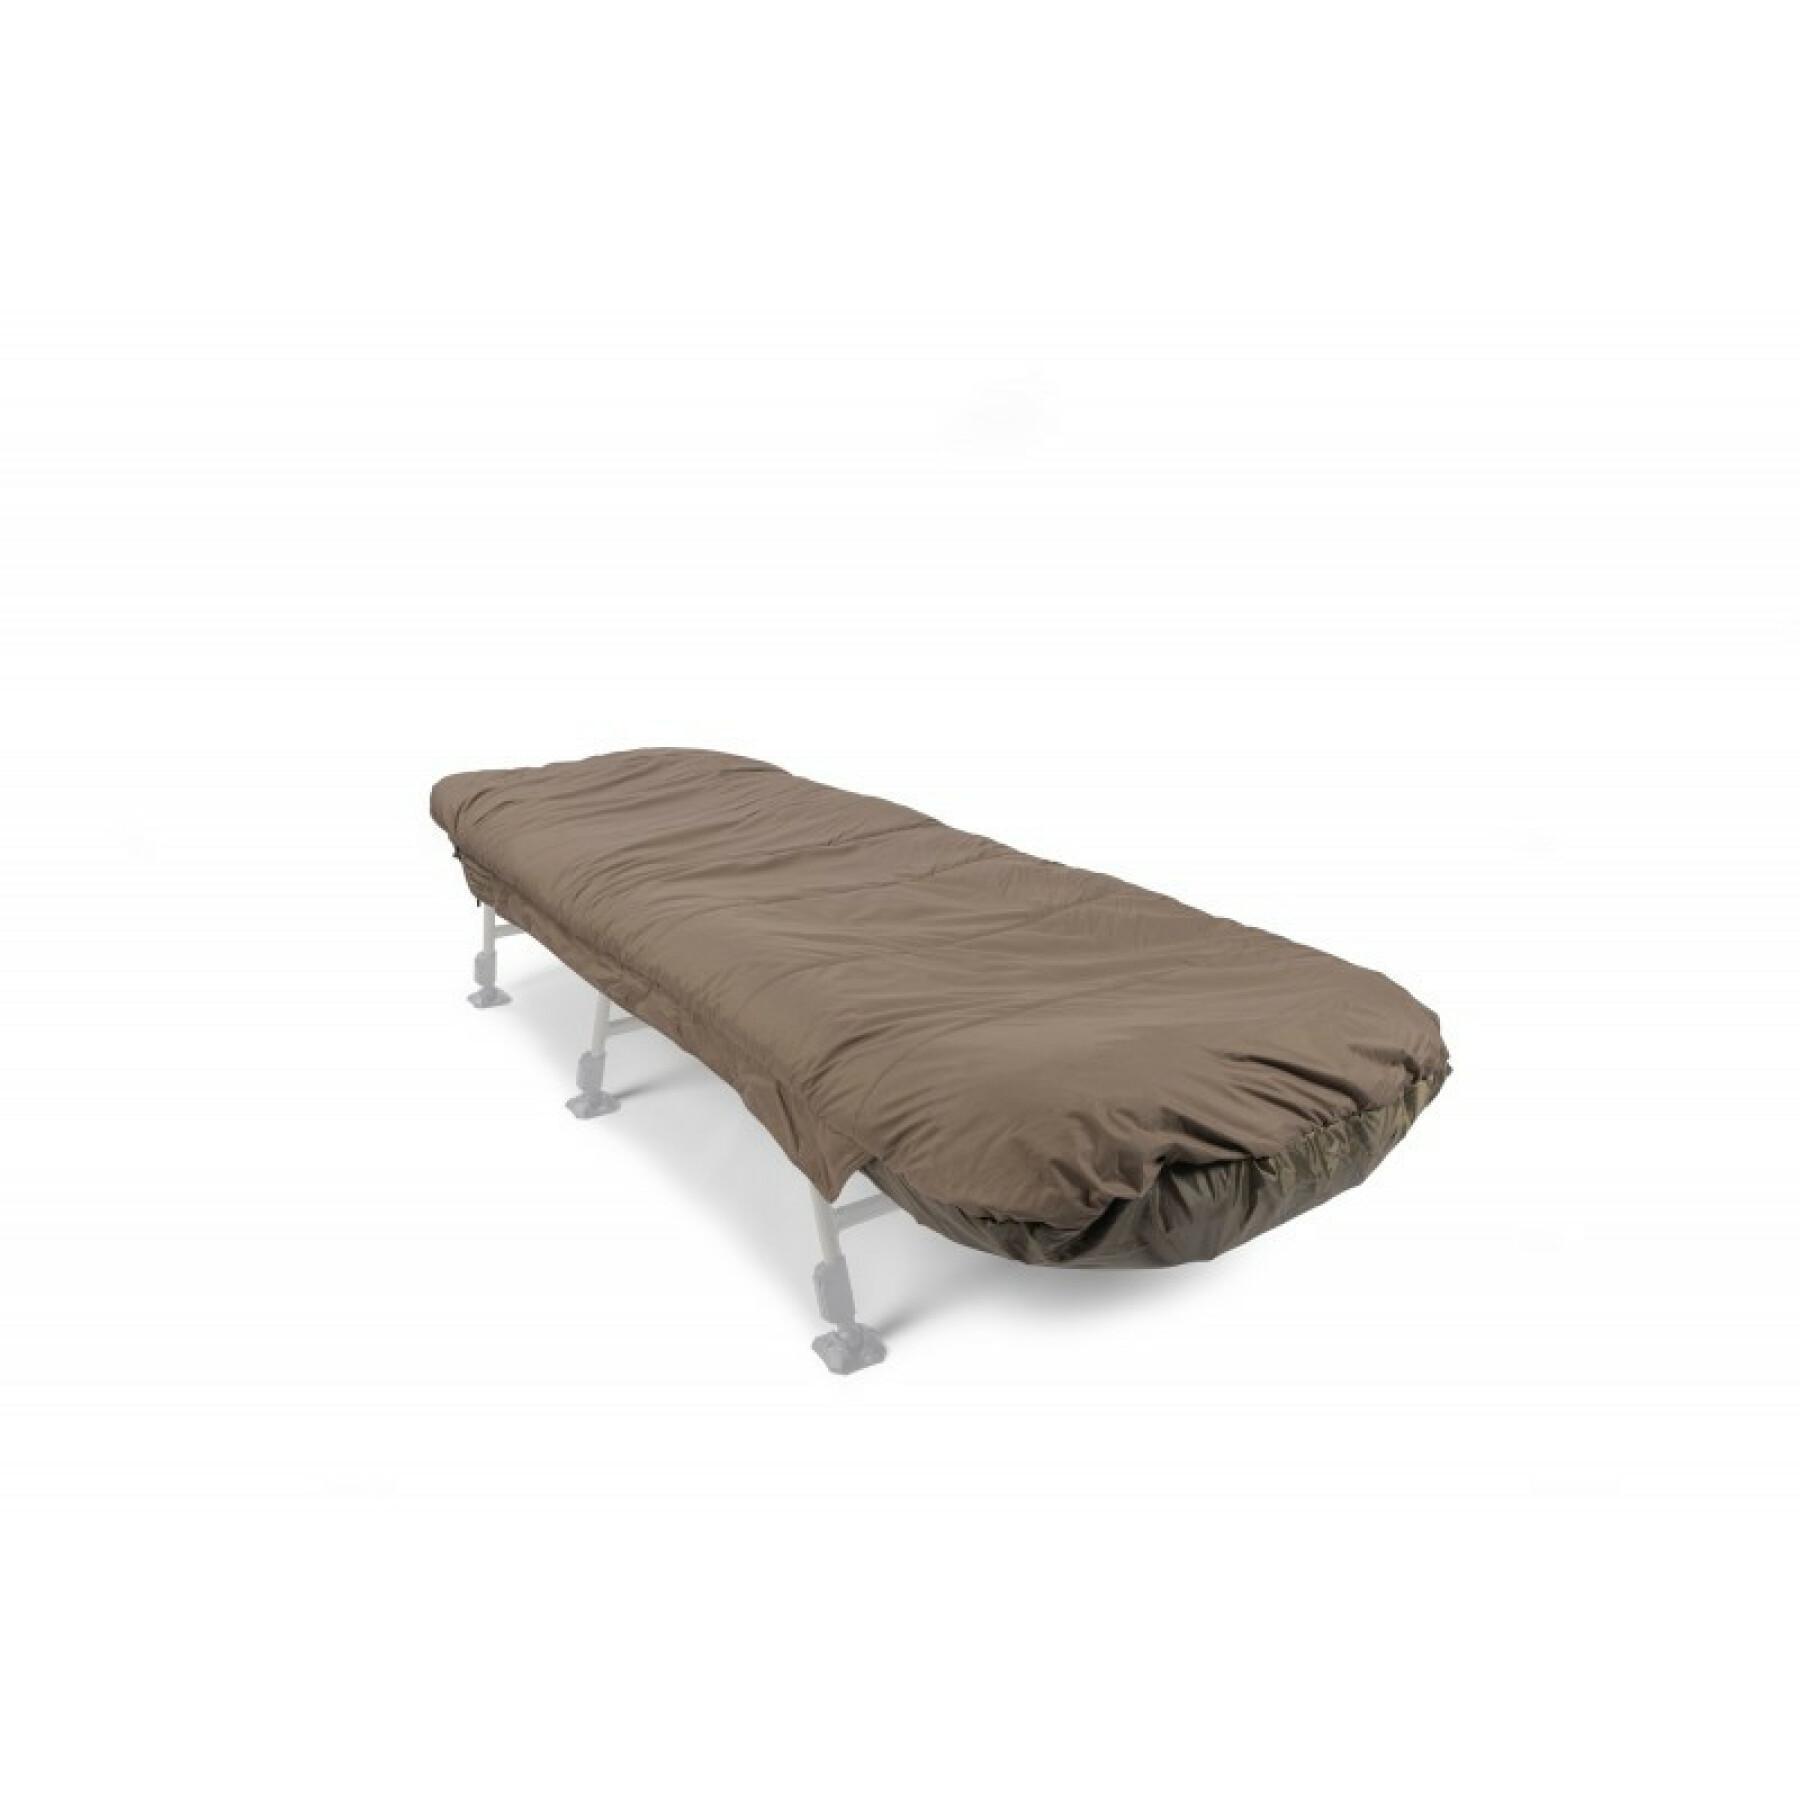 Bed chair Avid benchmark thermatech heated sleeping bag-